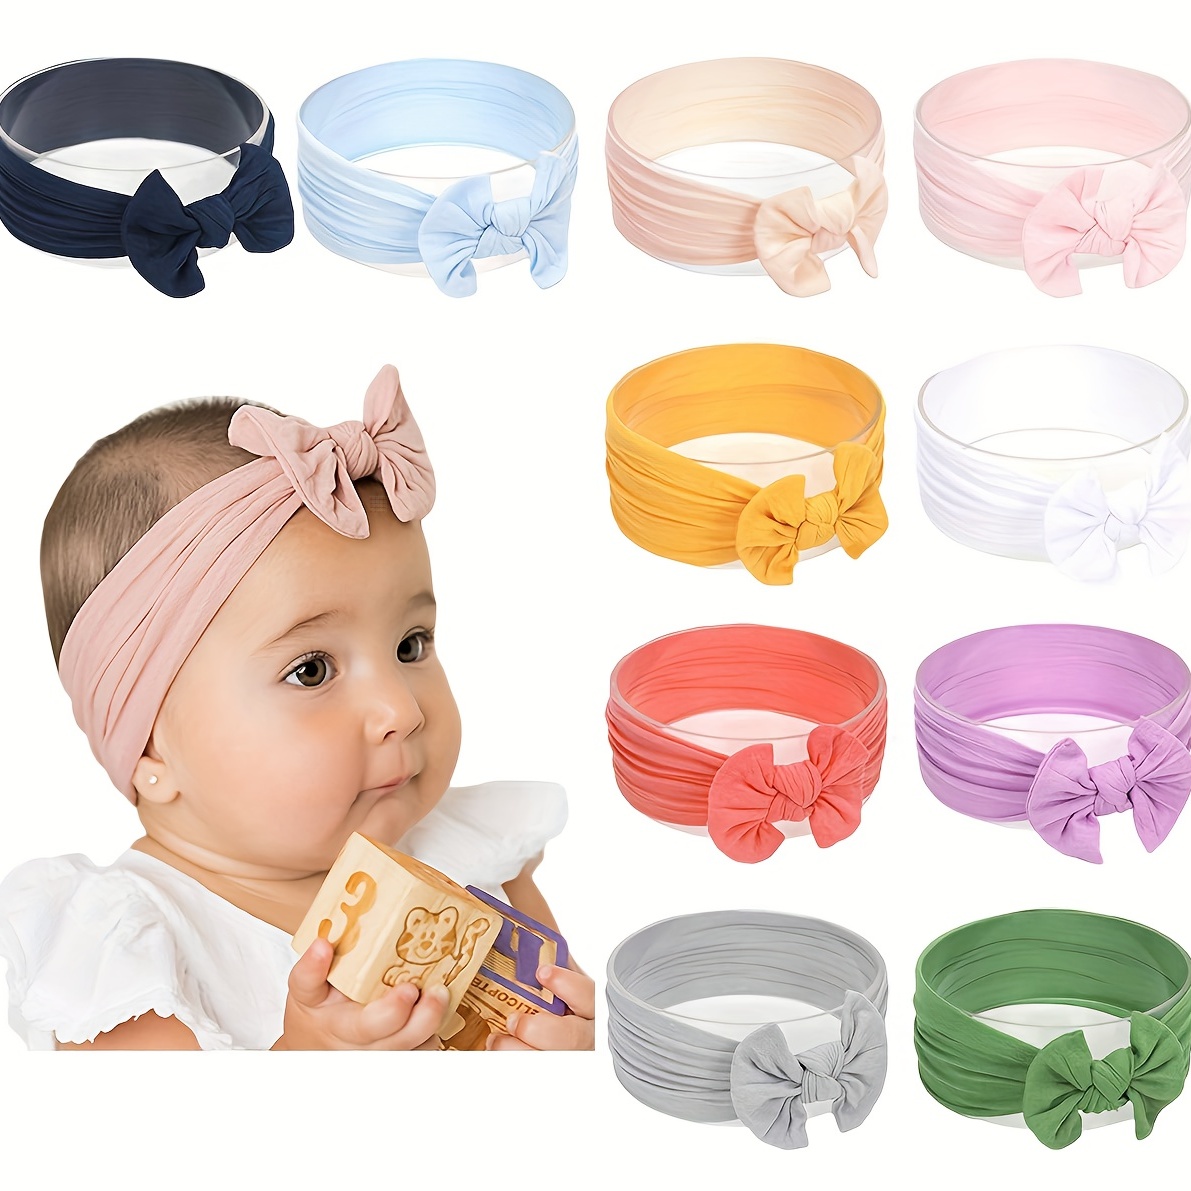 

10pcs Nylon Headbands Hairbands Knotted Children's Soft Headwrap Hair Accessorie For Newborn Infant Toddler Baby Girl